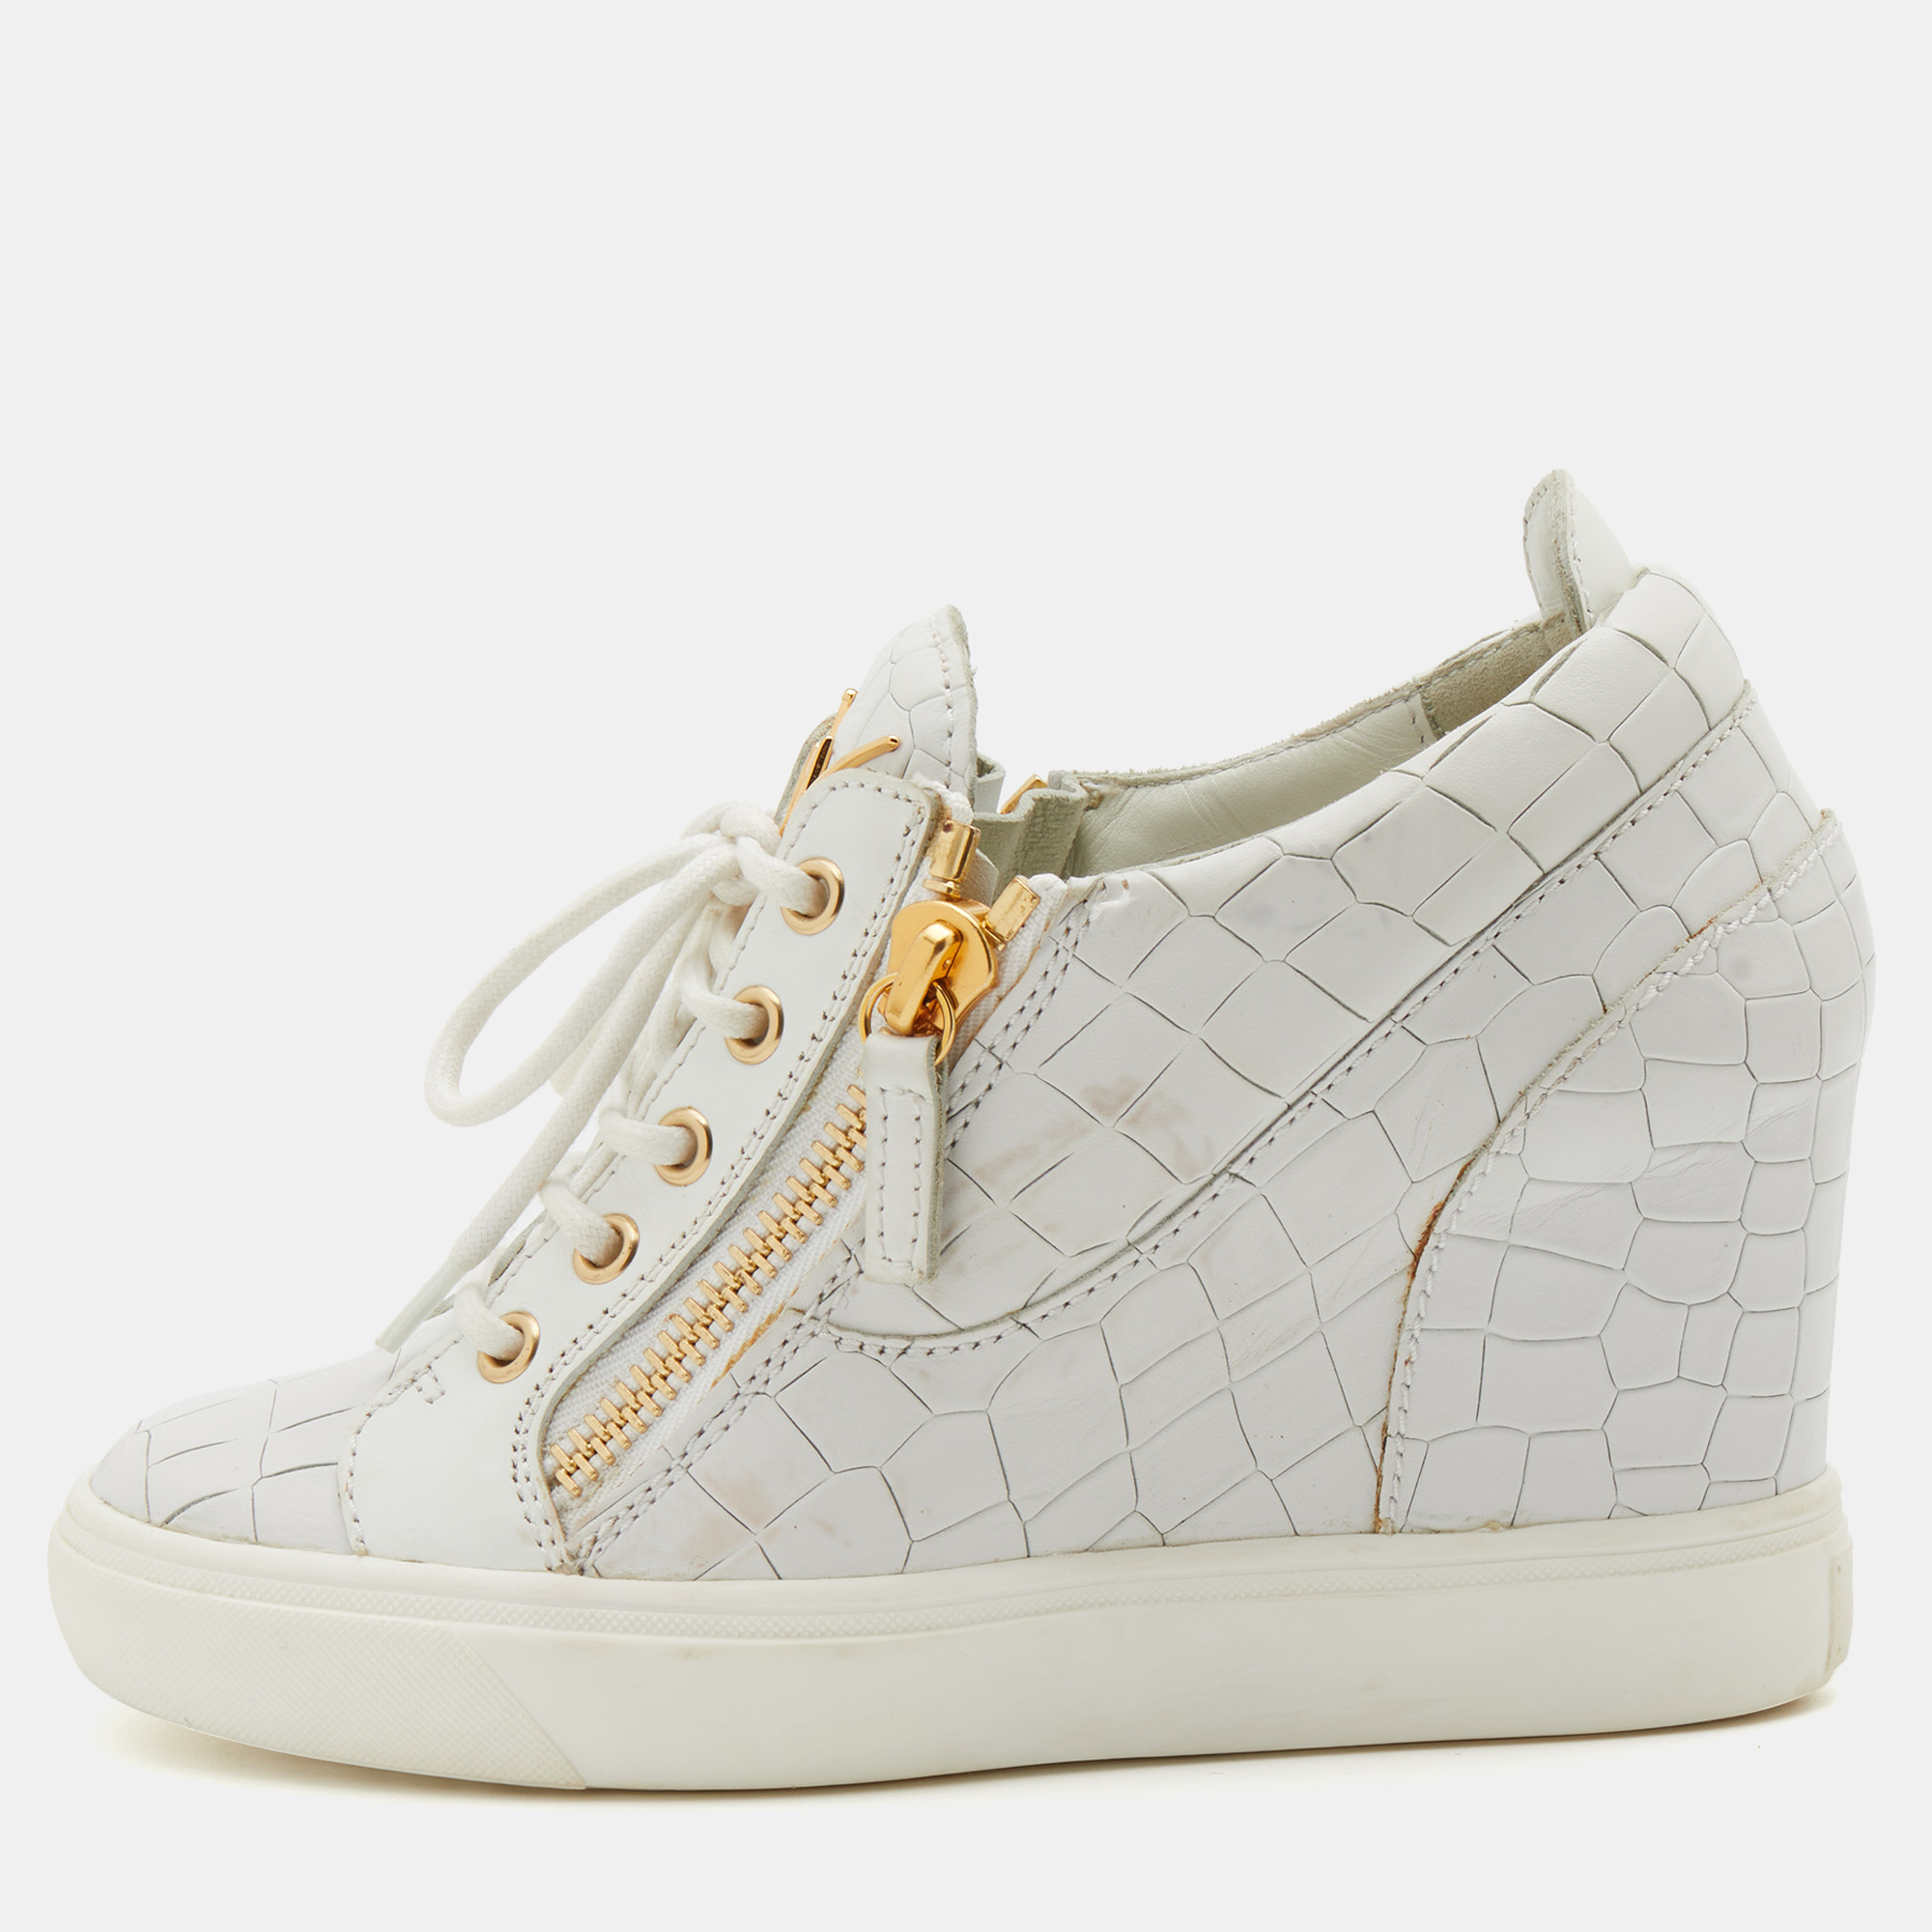 Pre-owned Giuseppe Zanotti White Croc Embossed Leather Wedge Trainers Size 37.5